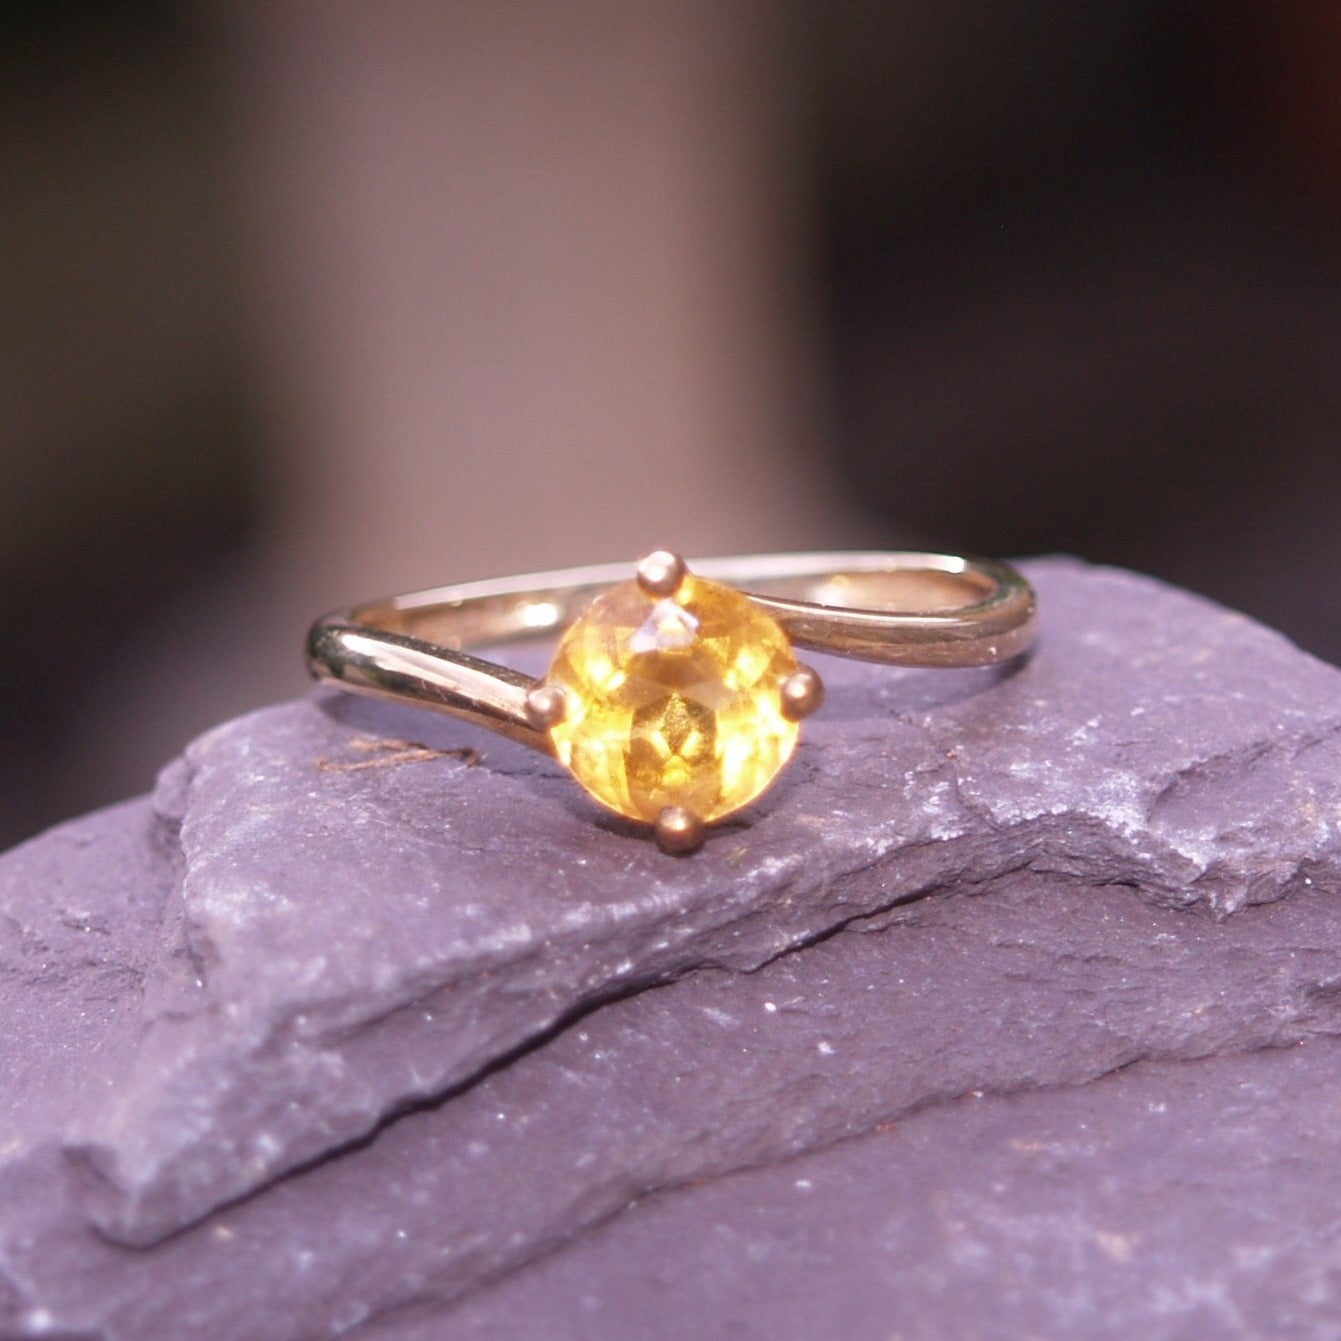 9ct Gold & Citrine Solitaire Twist Ring Size T or 9 3/4 US.